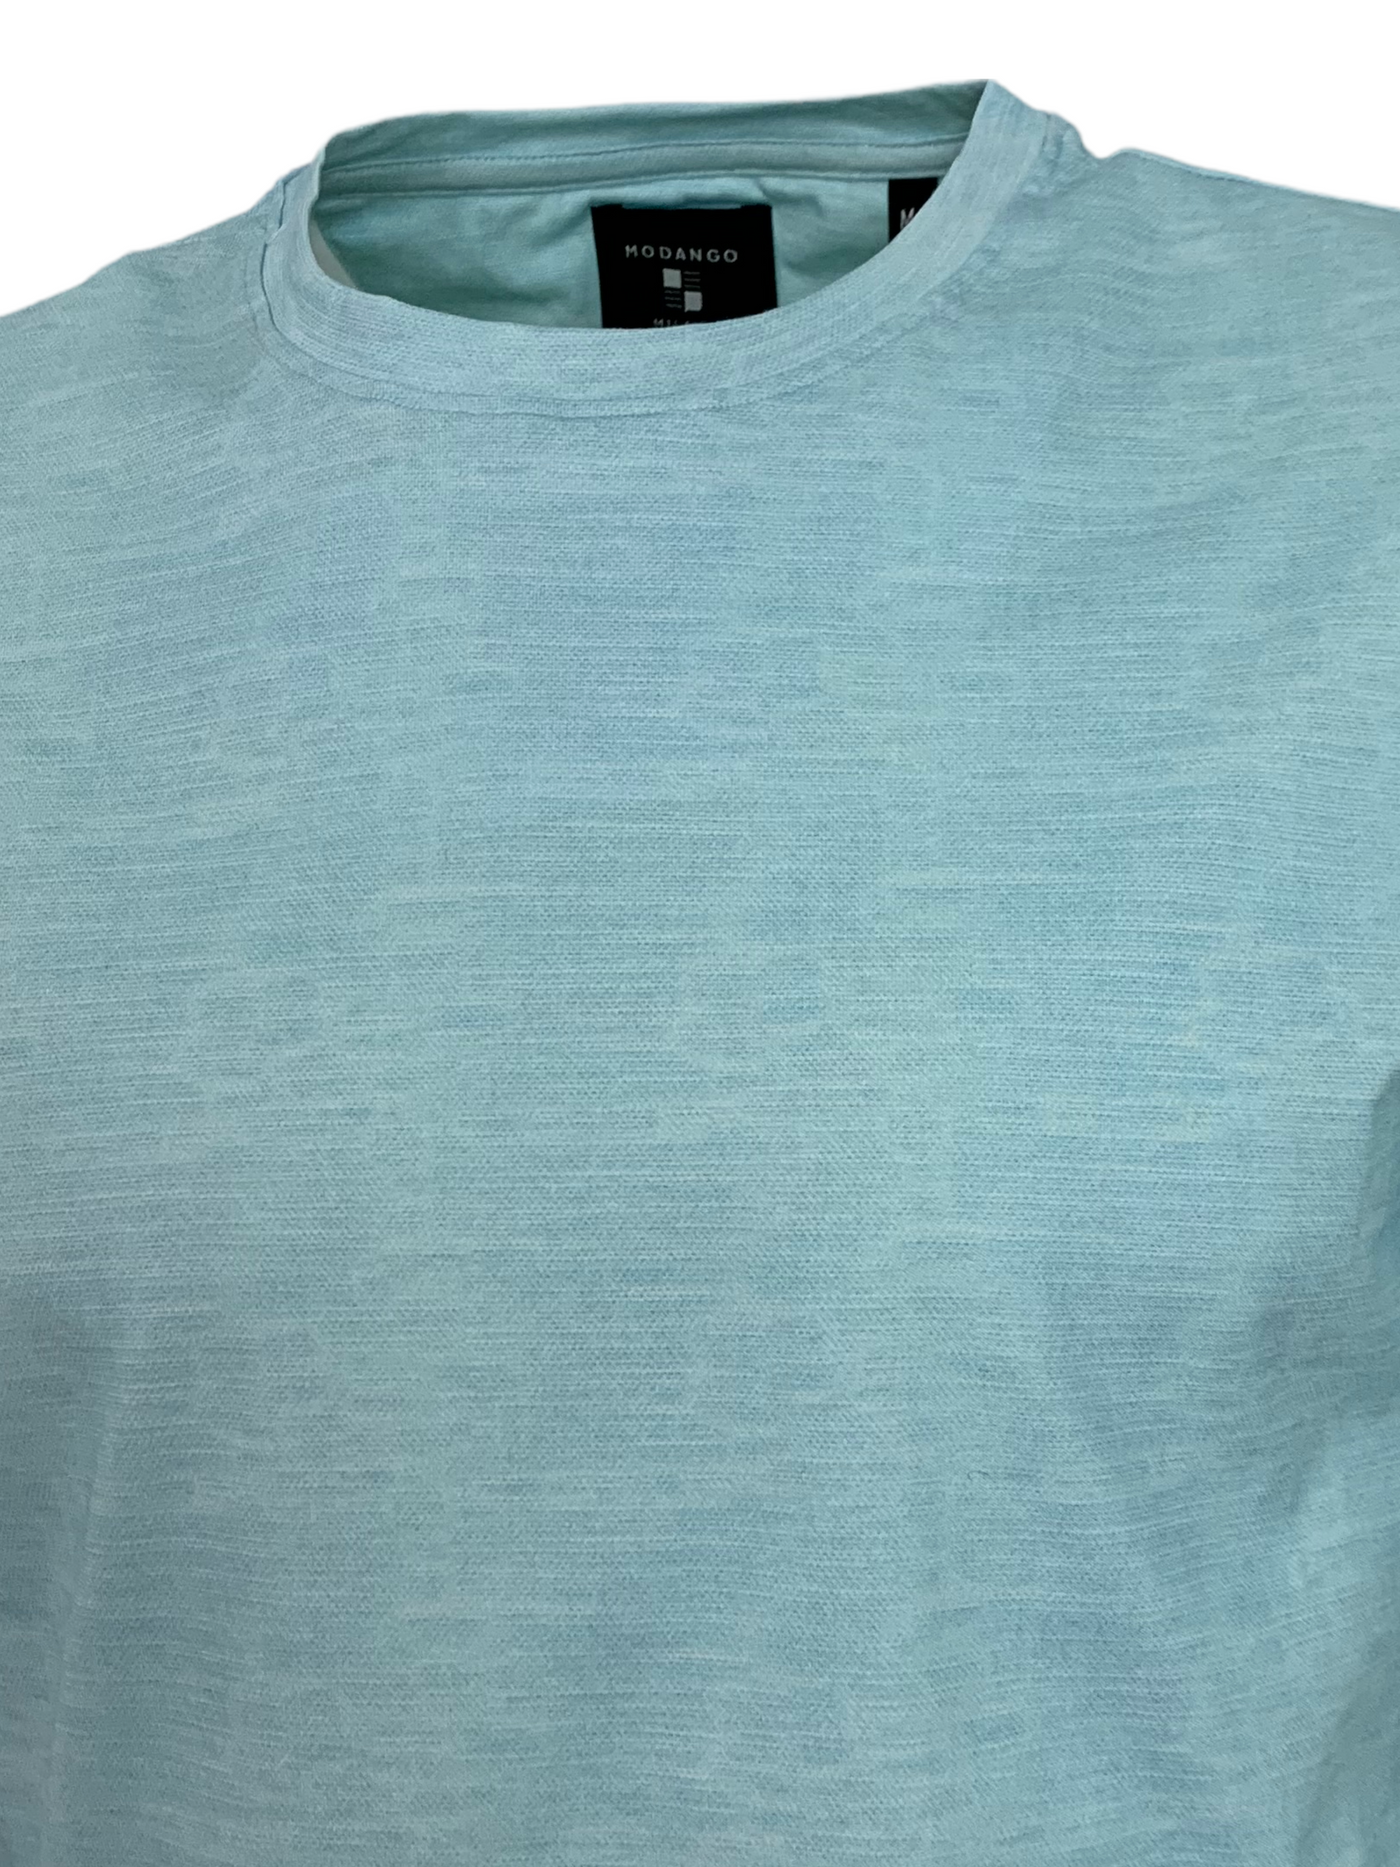 T-shirt turquoise chiné extensible